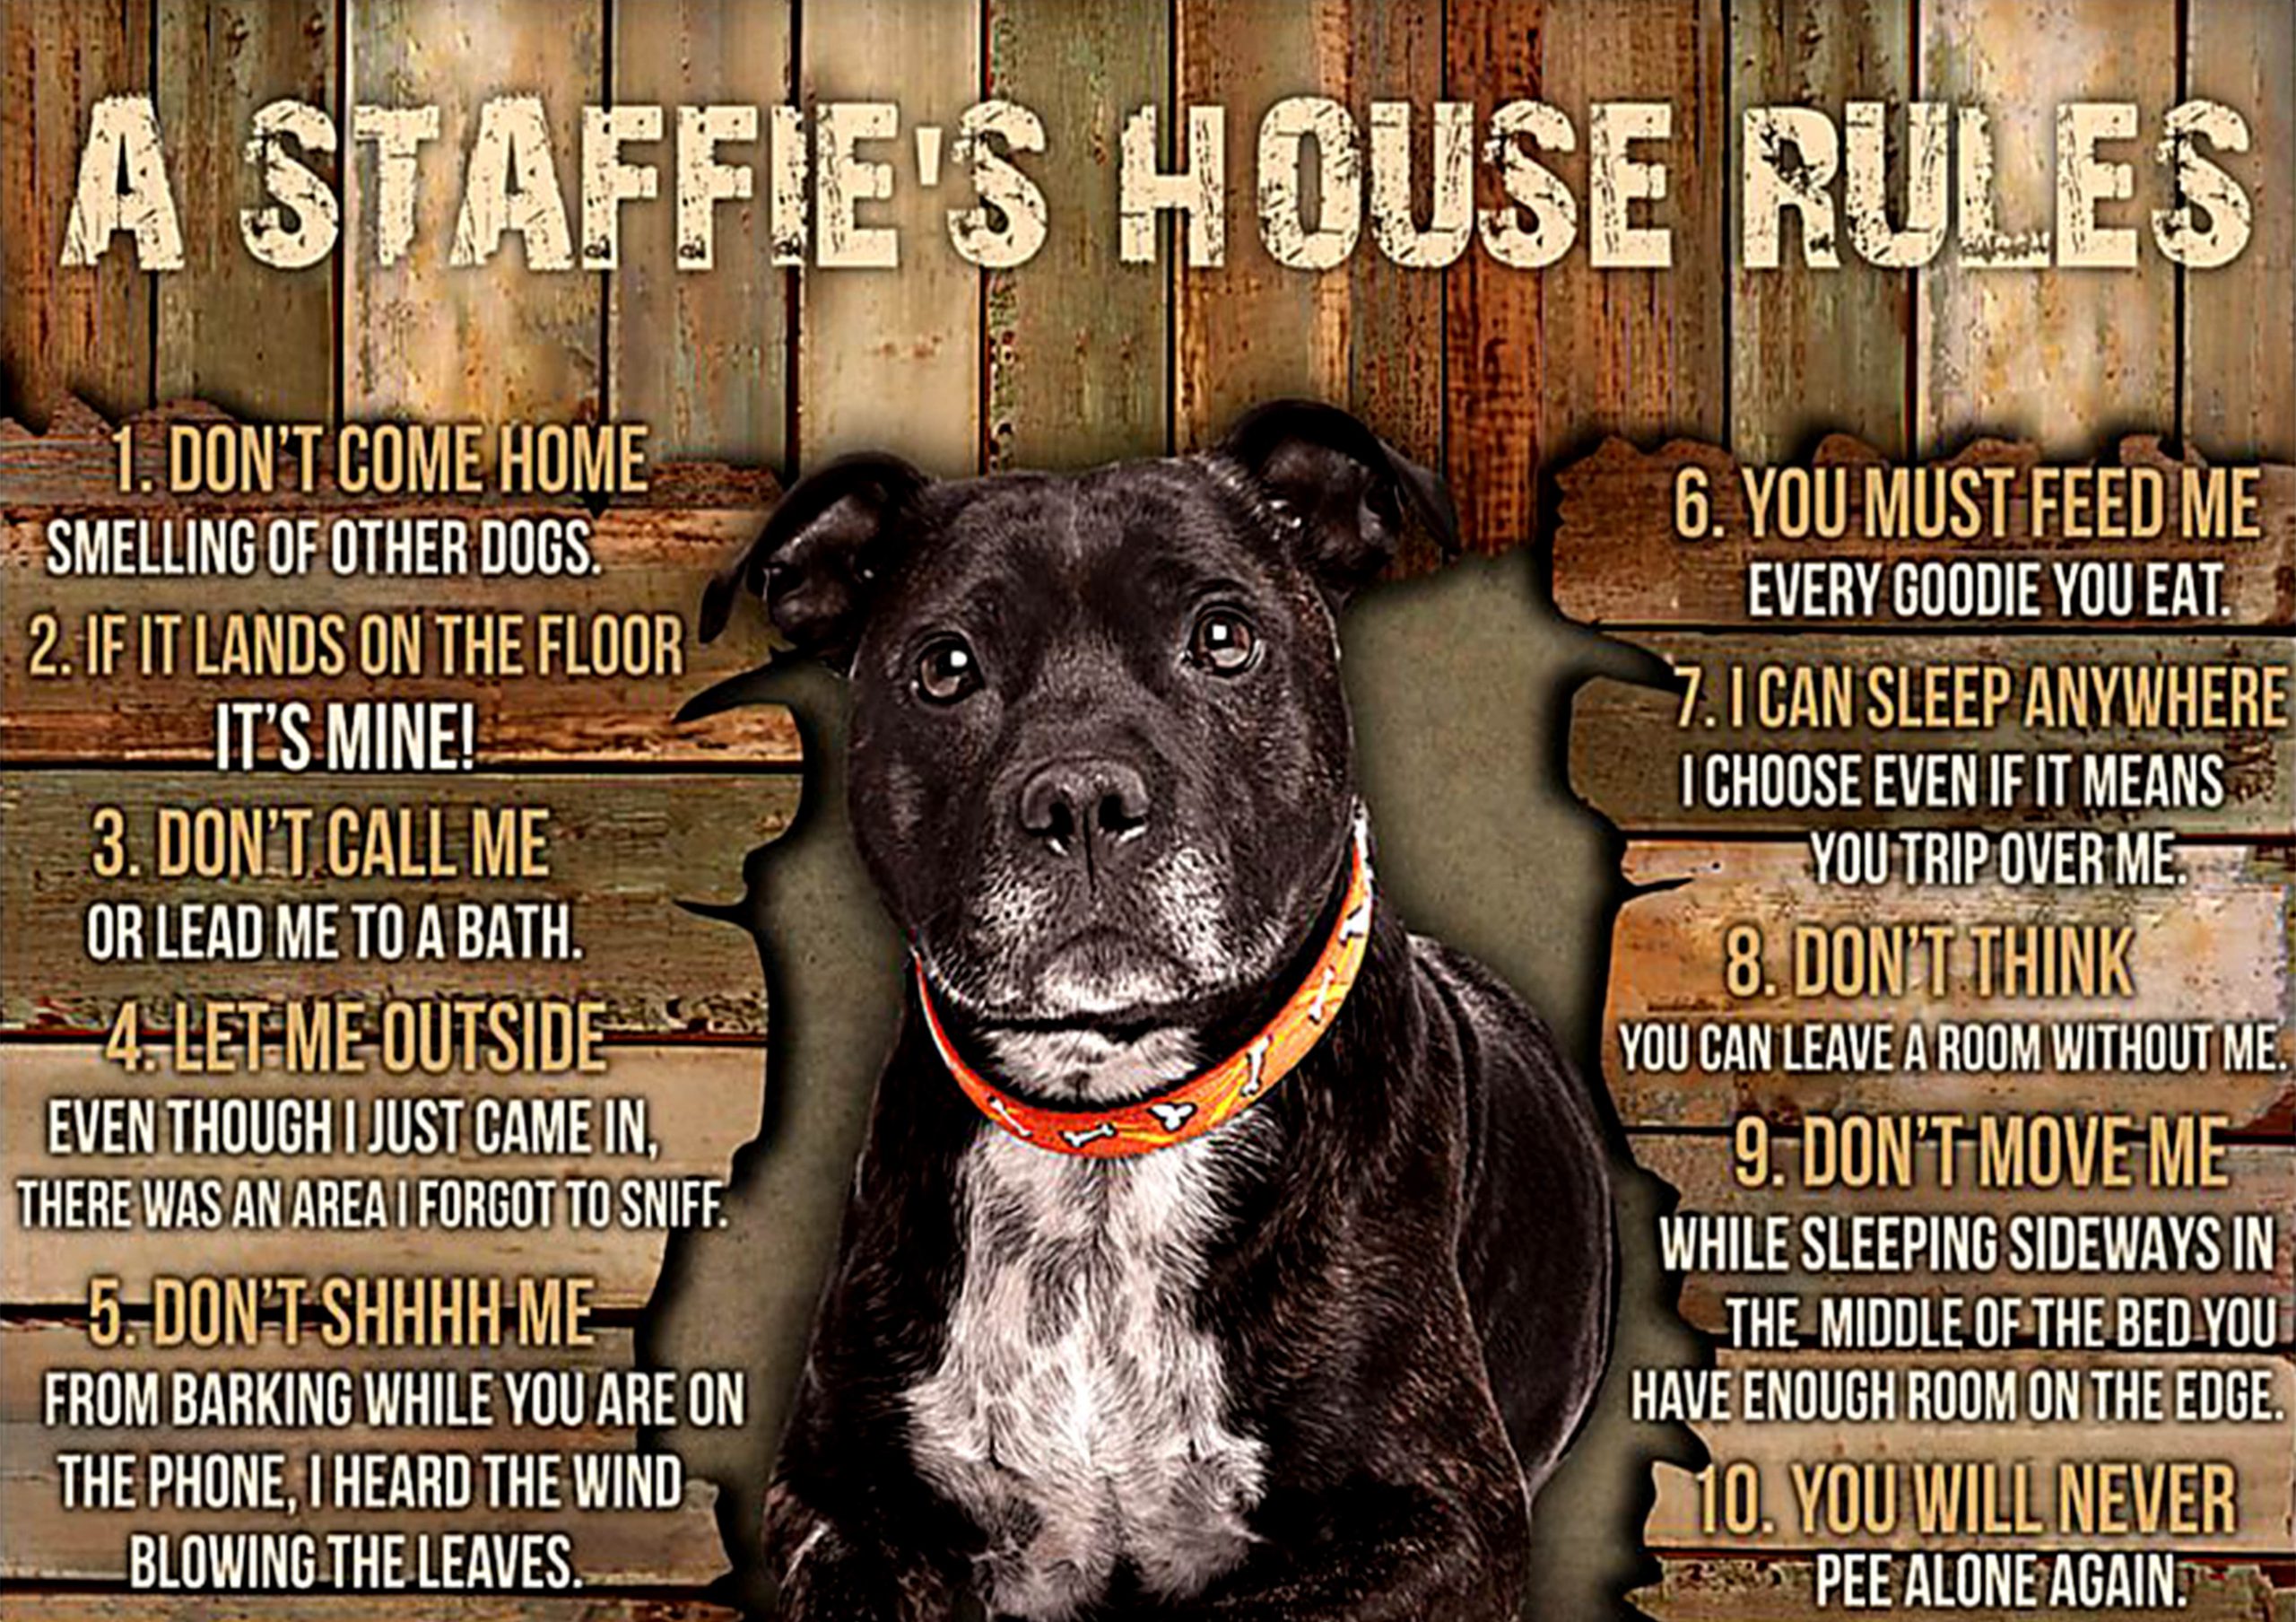 dog lover a staffies house rules poster 1 - Copy (2)